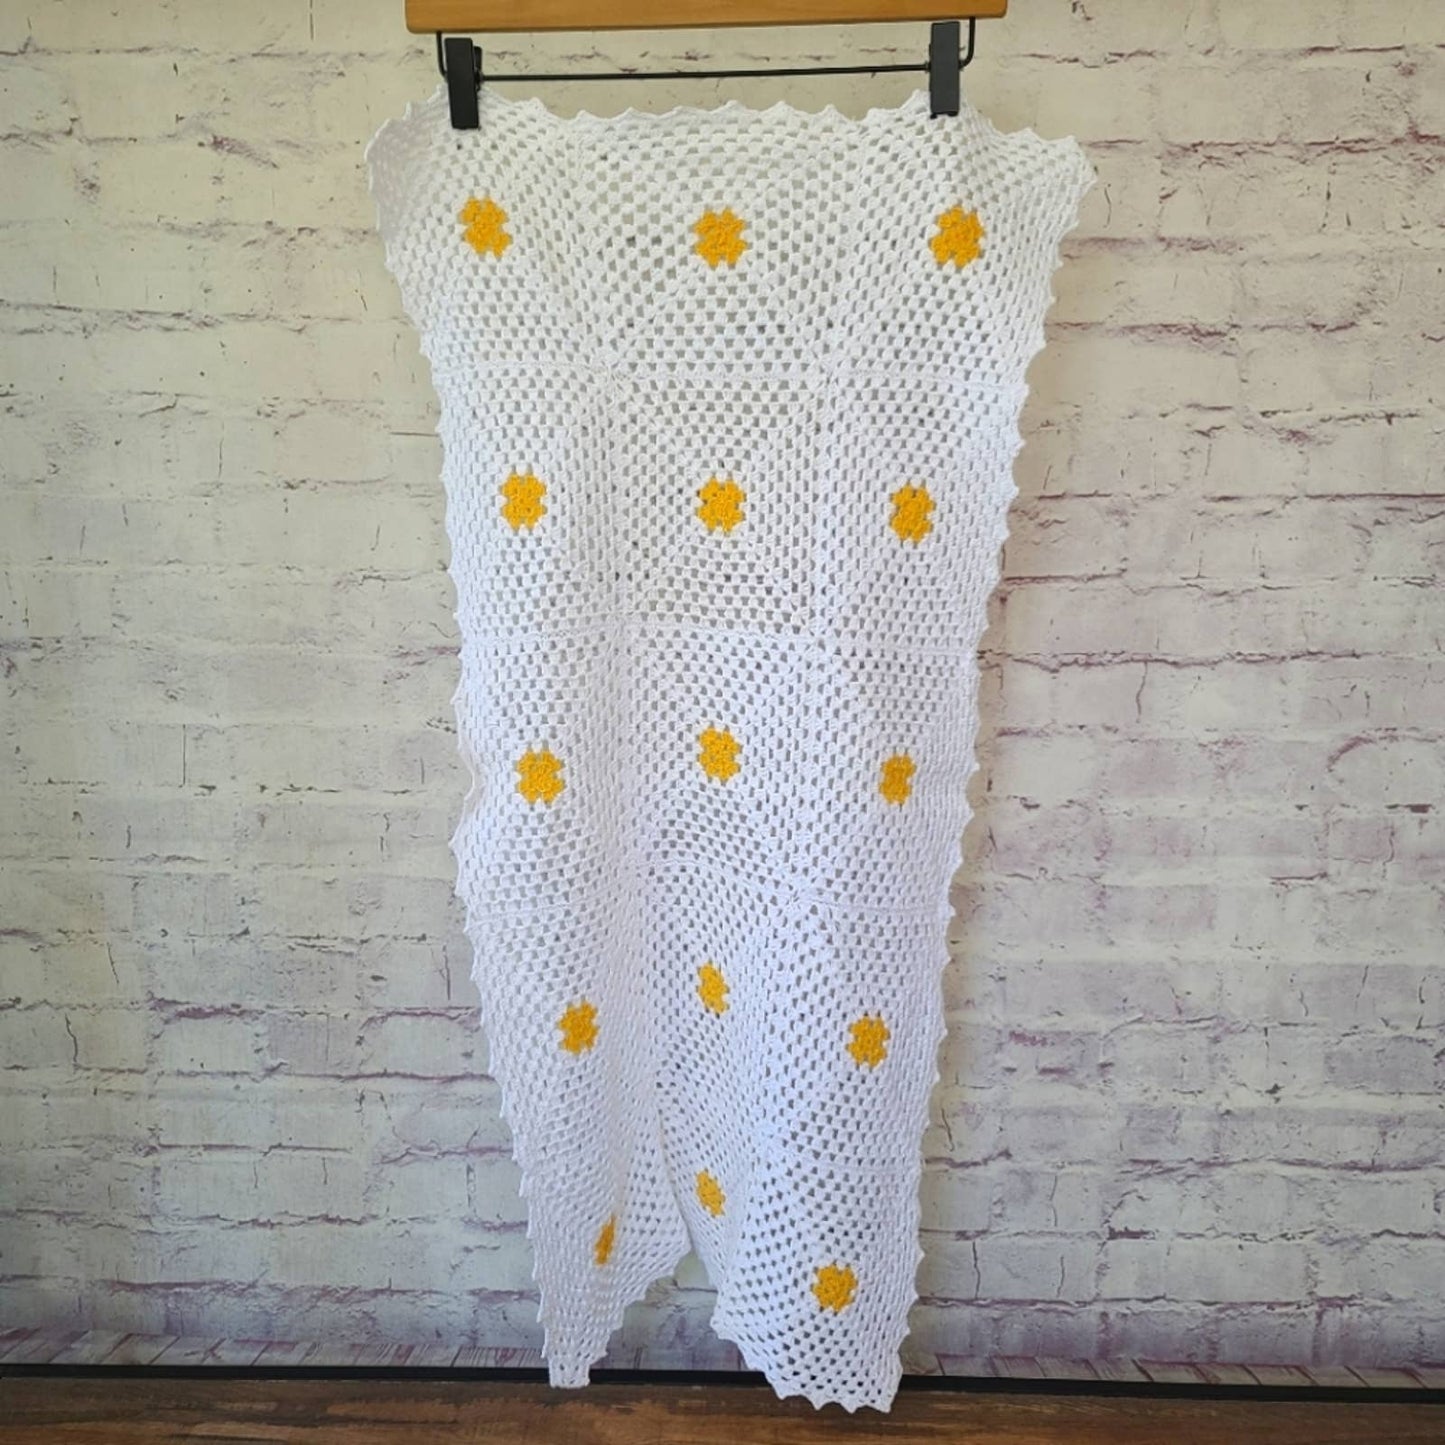 Vintage Handmade Crochet White and Marigold Jaqcuard Knit Table Runner 16x30